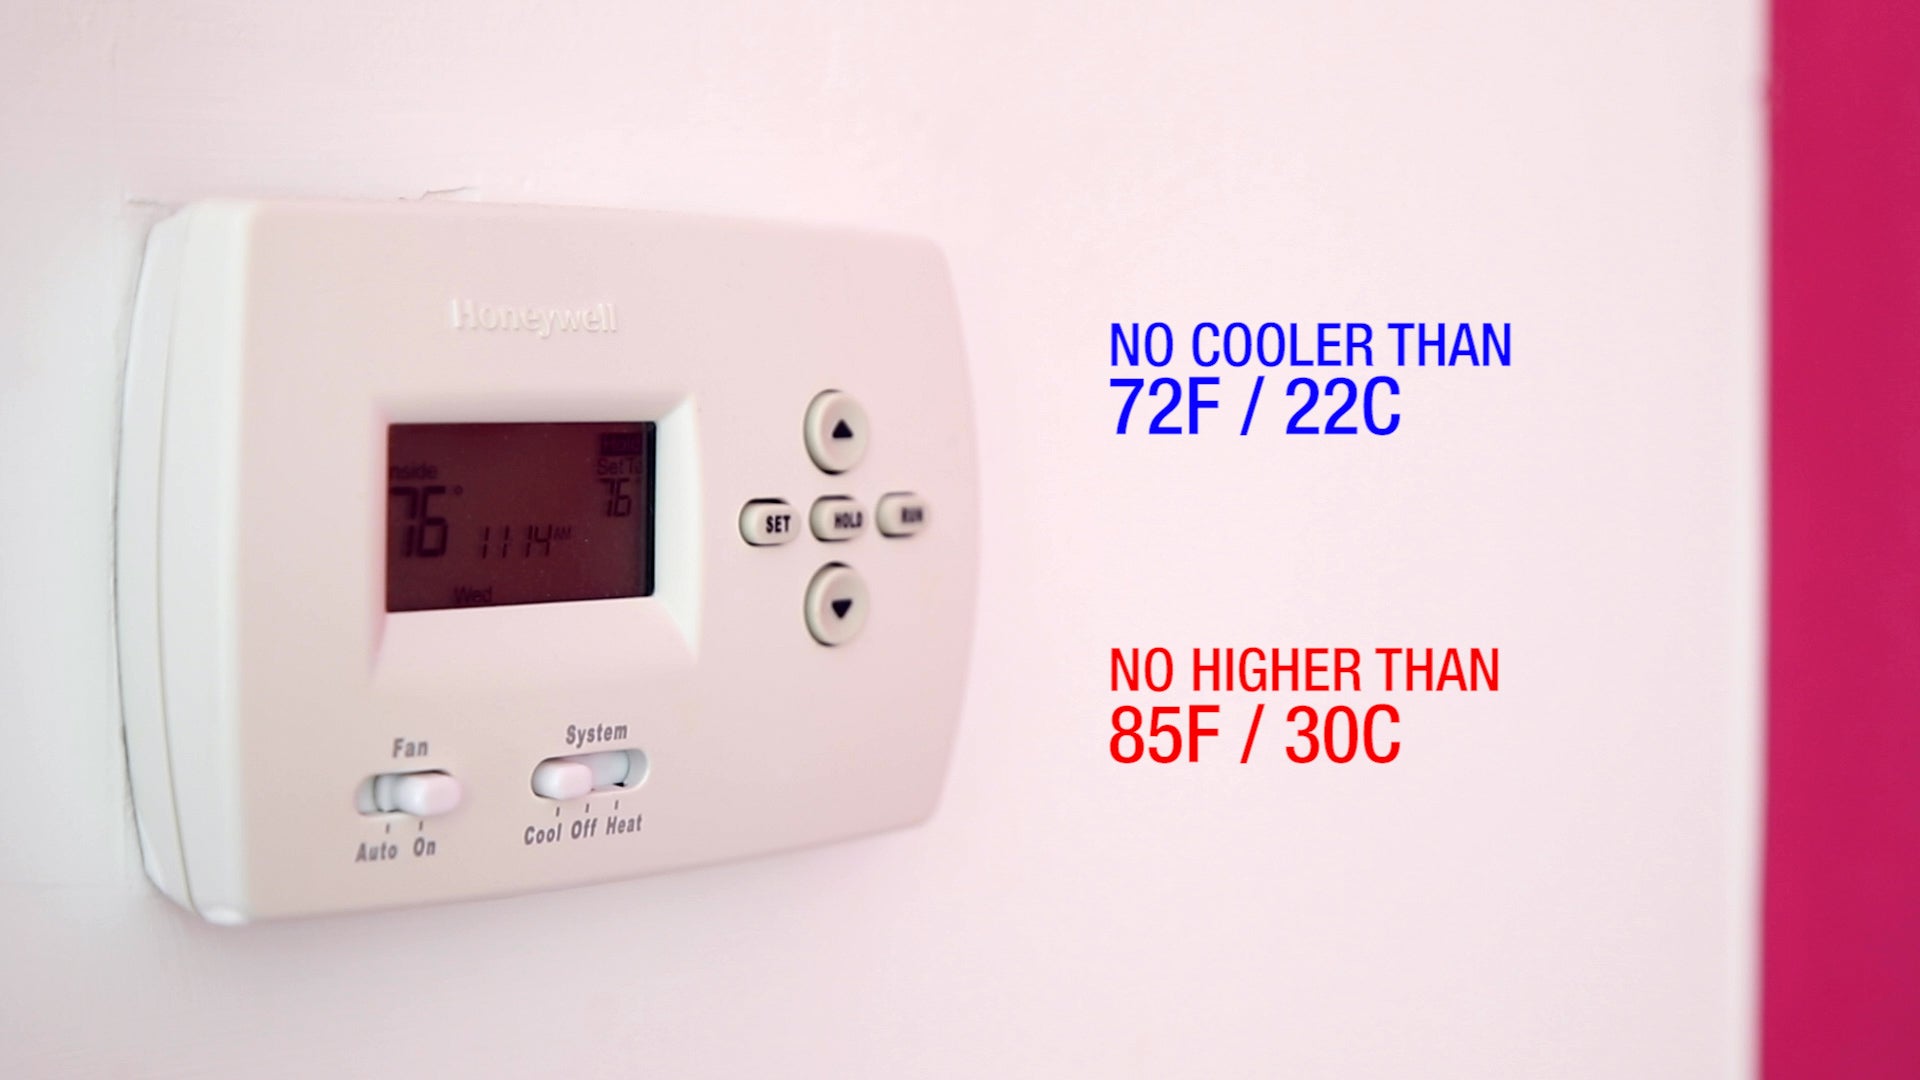 ideal temperature to resin 75-85F or 24-30C